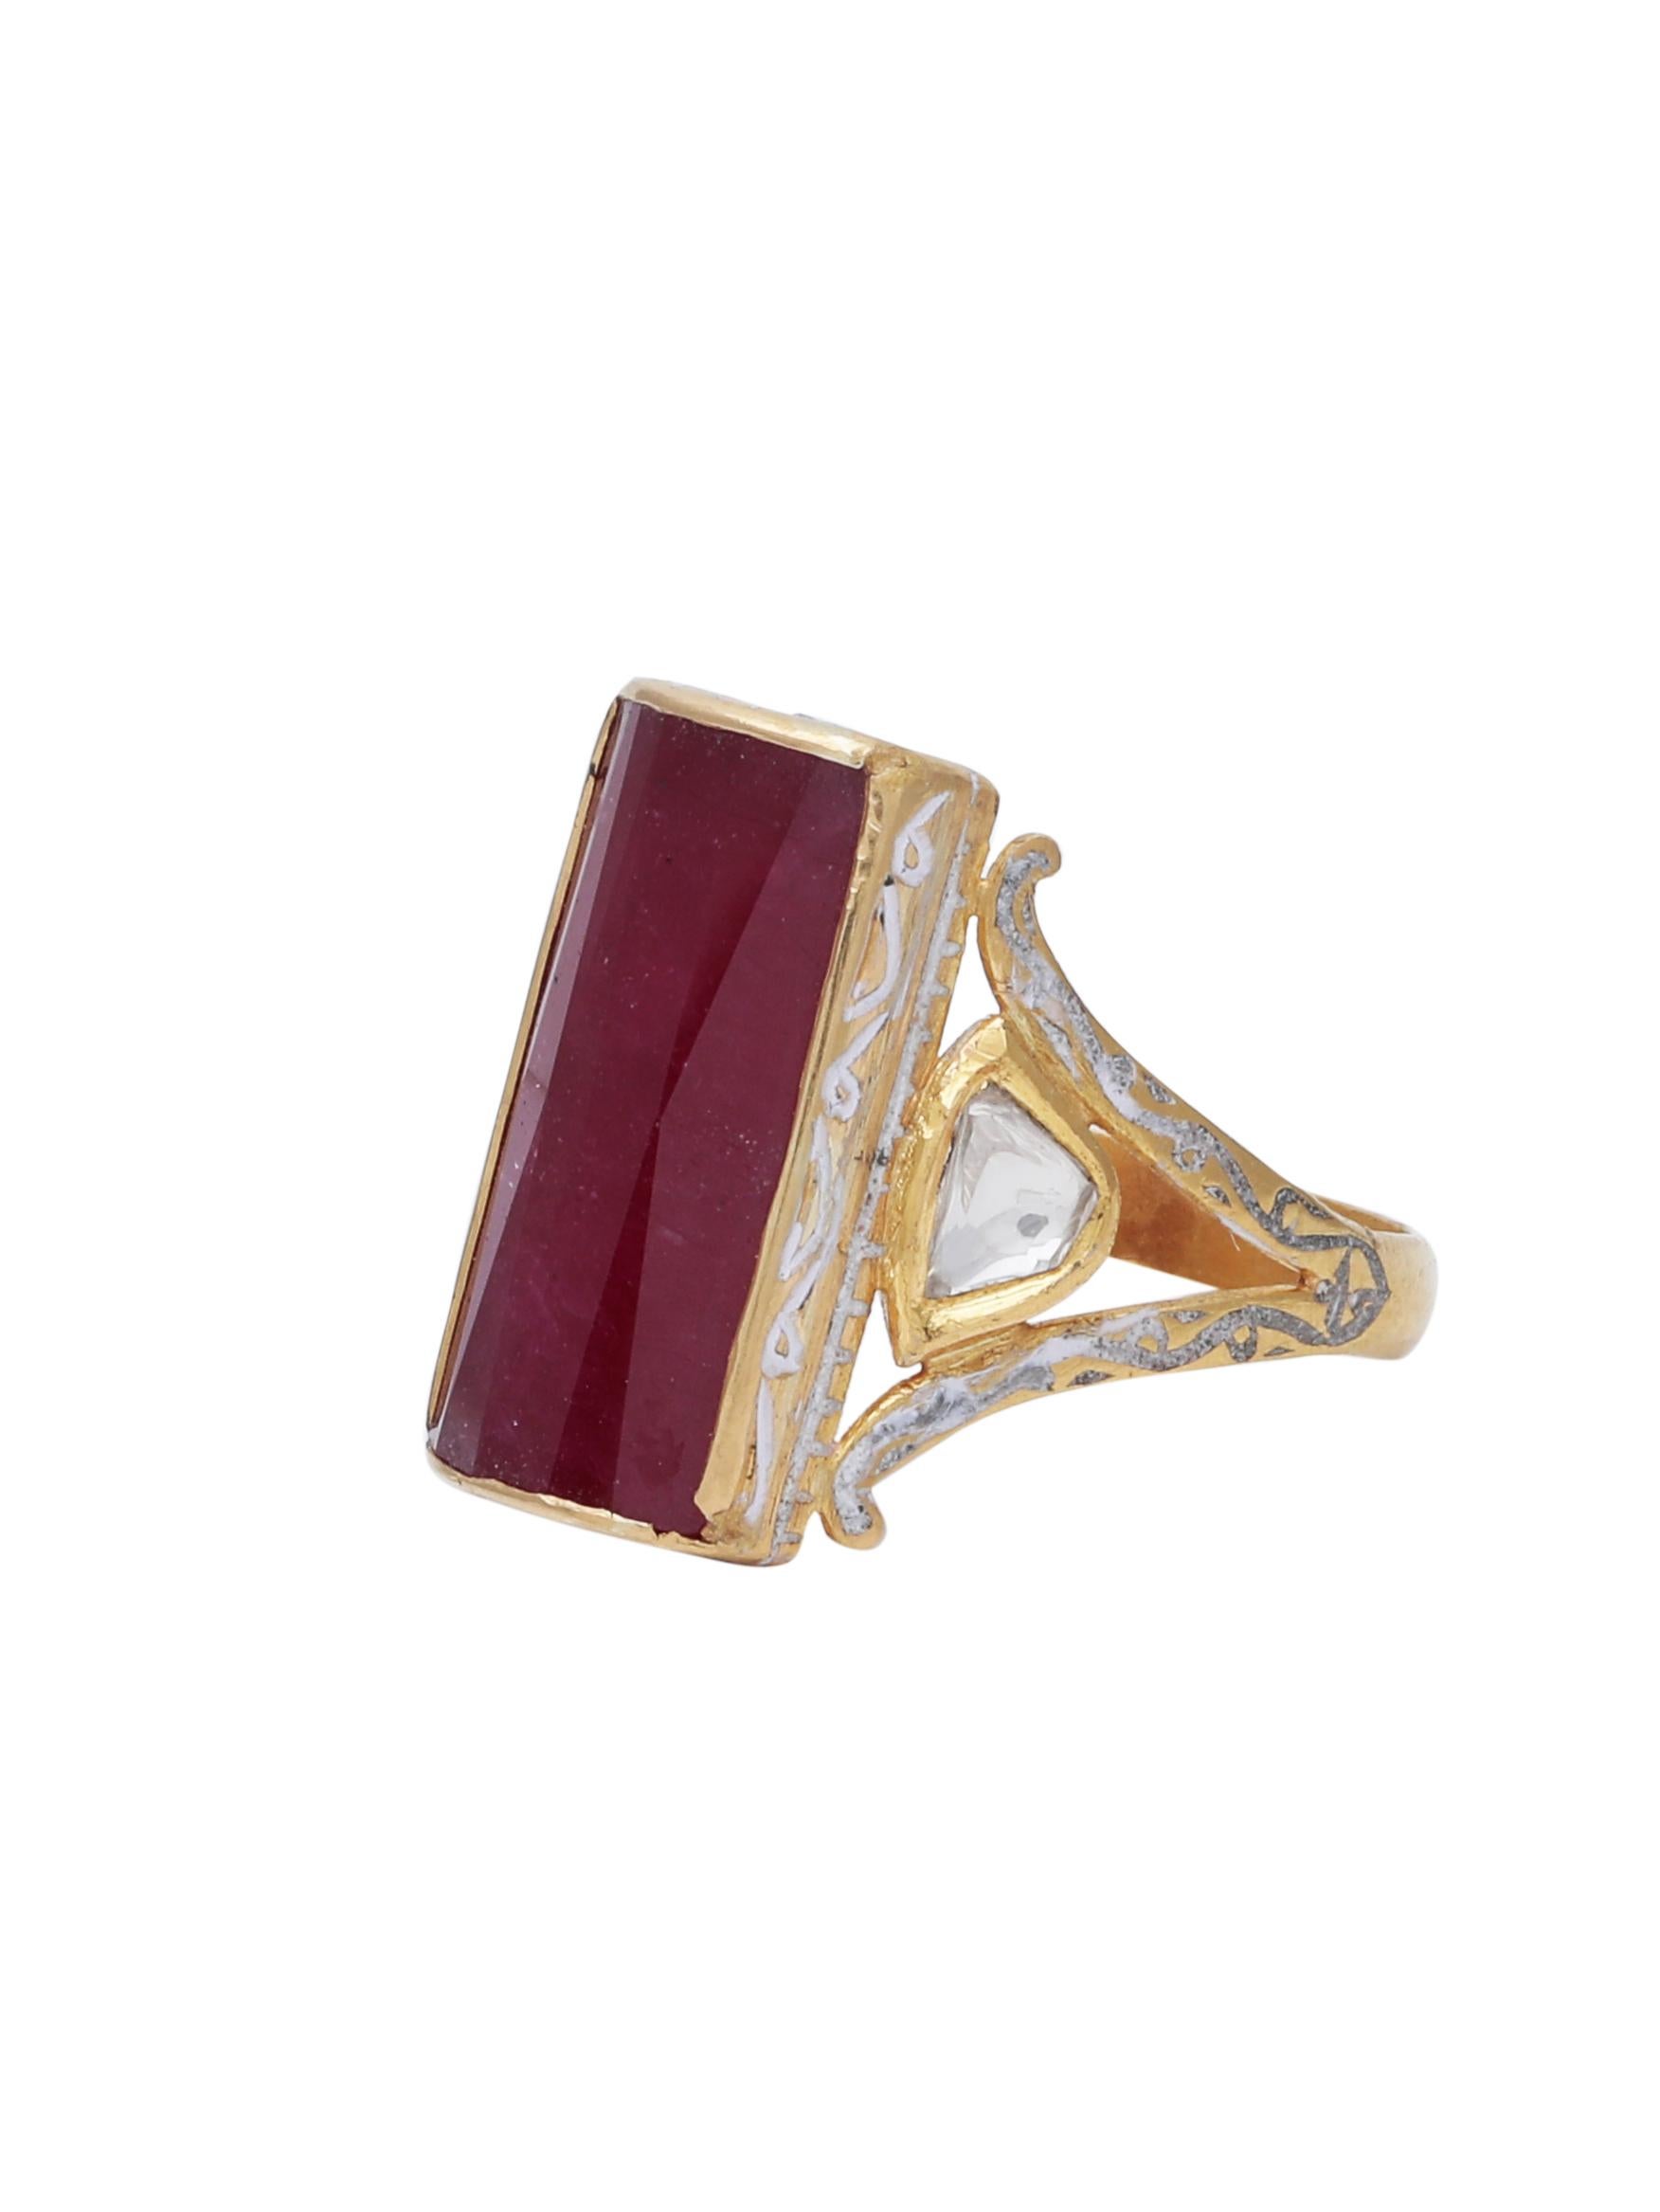 A stunning ring with Ruby and 2 uncut diamonds on the side with white enamel detailing. All handcrafted in 18K Gold.
The beautiful red Ruby in the centre of the cocktail ring is of 12 carats. Its of an unusaul Rectangle shape and with facets on the